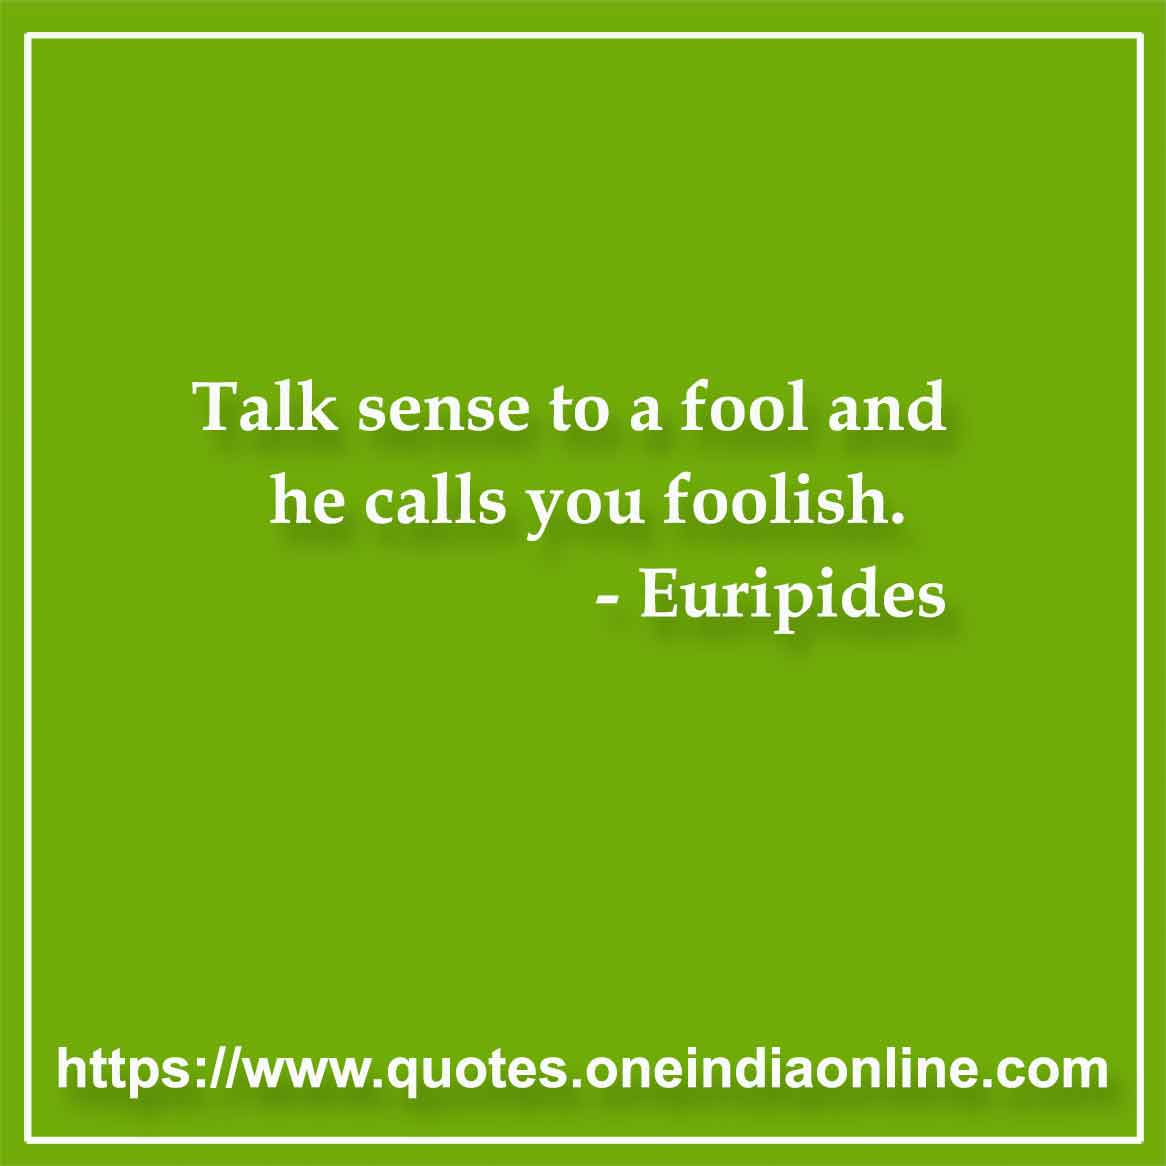 Talk sense to a fool and he calls you foolish.

- Stupid Quotes by Euripides 